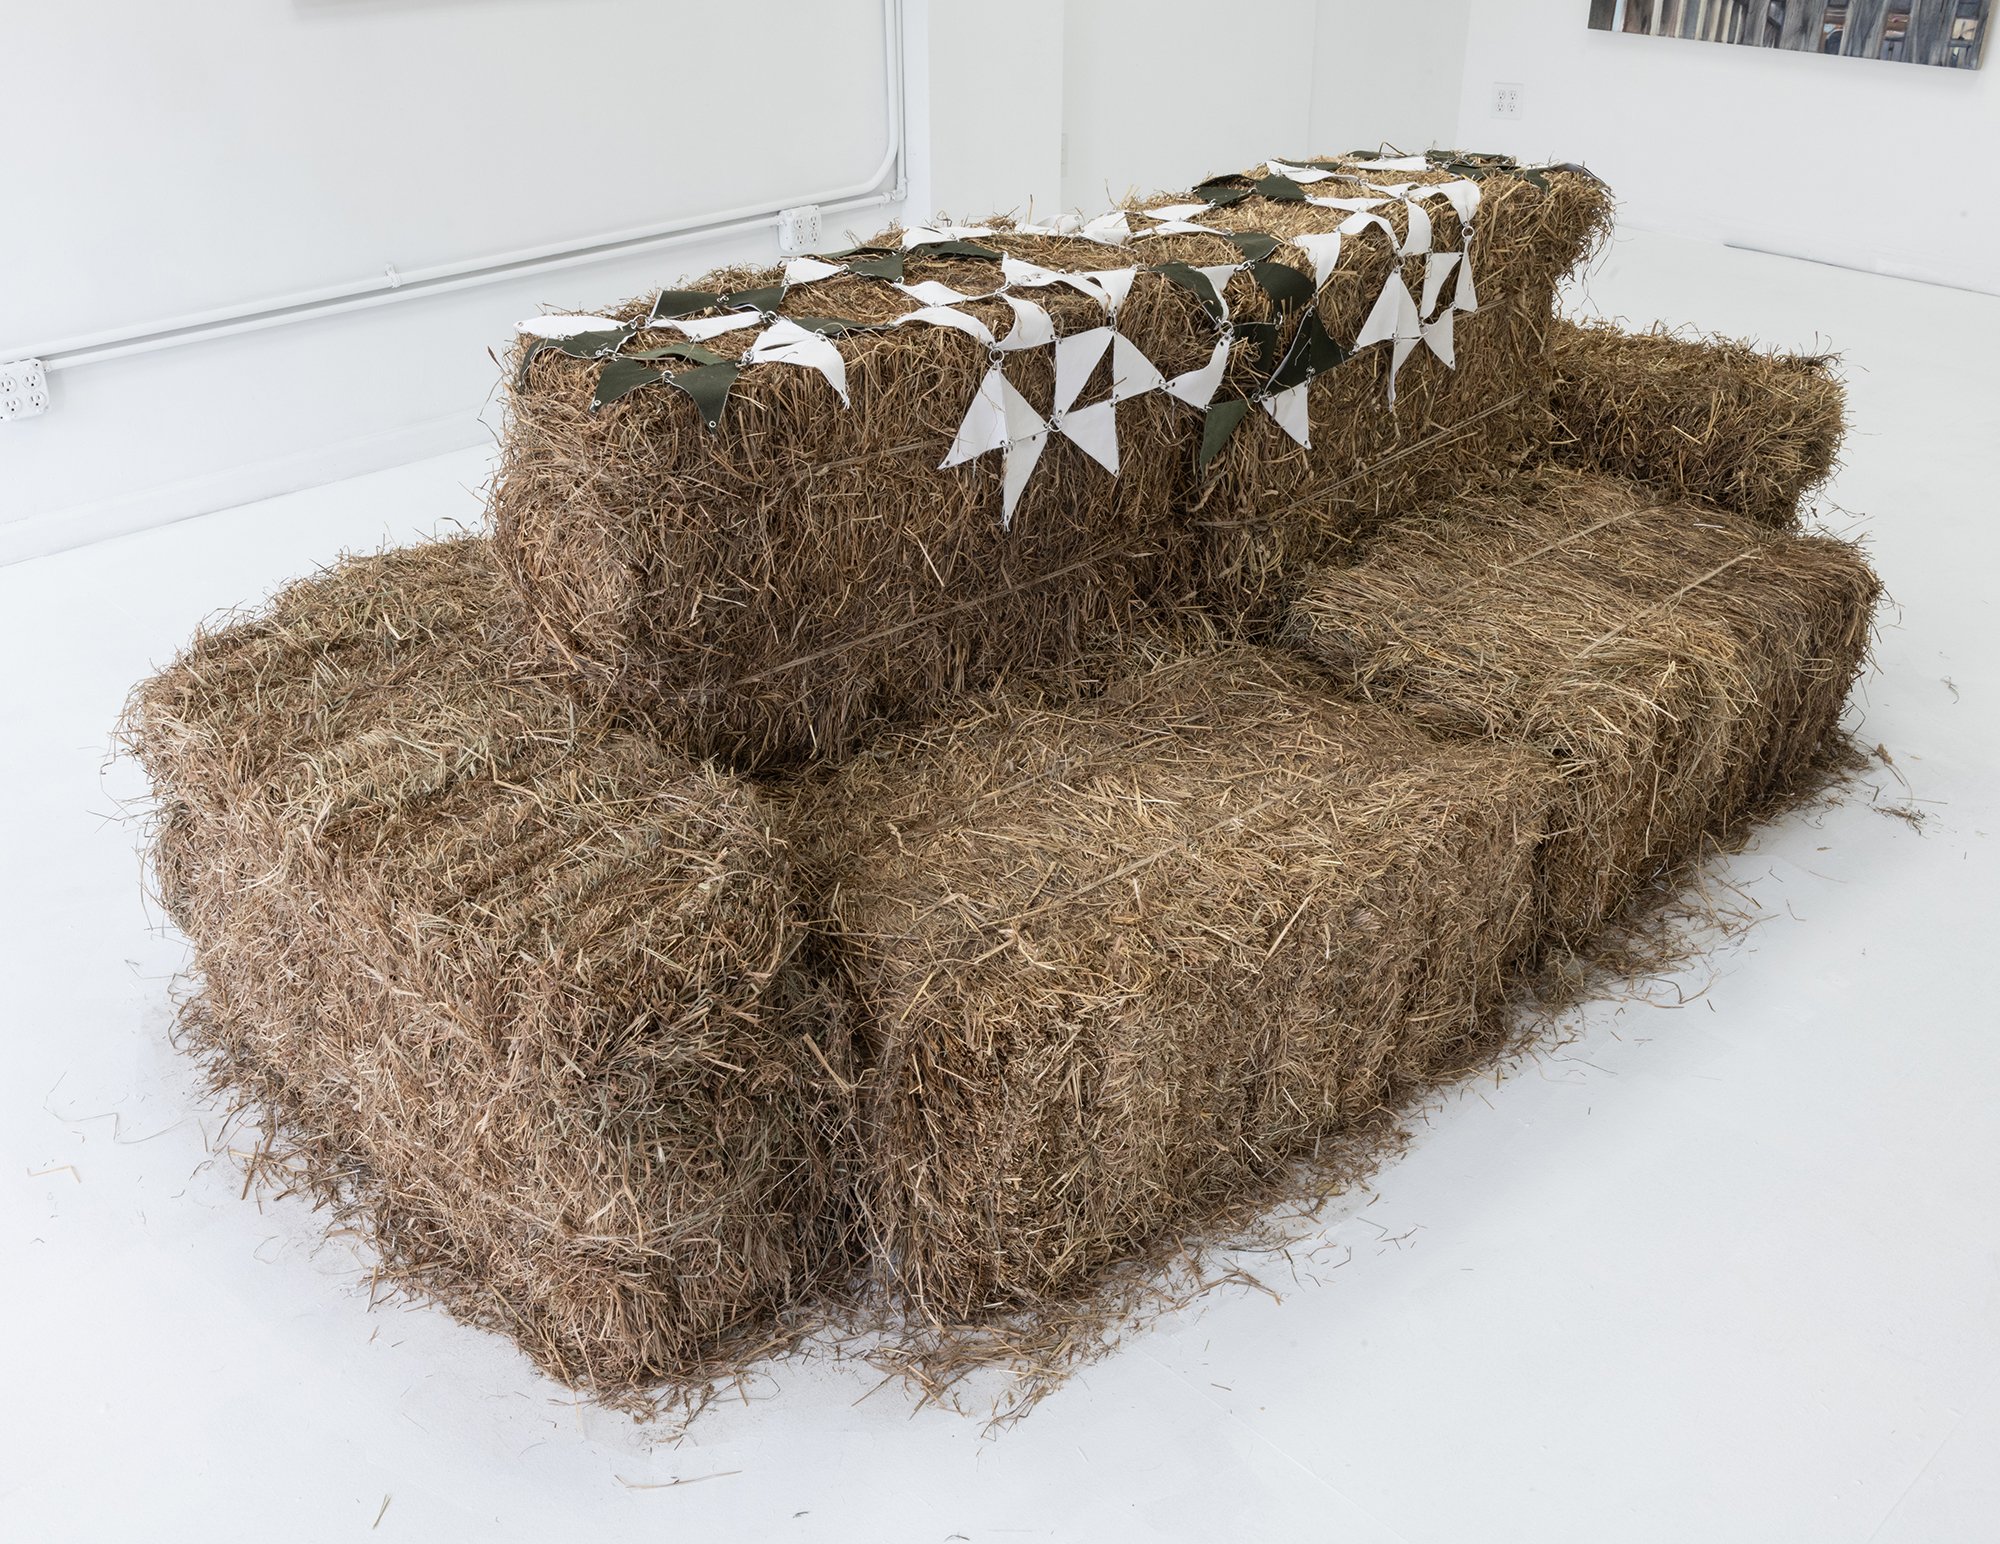  Sydney Shen,  Prop,  2022. Cotton, leather, aluminum, hay. 100 x 57 x 32 inches. 